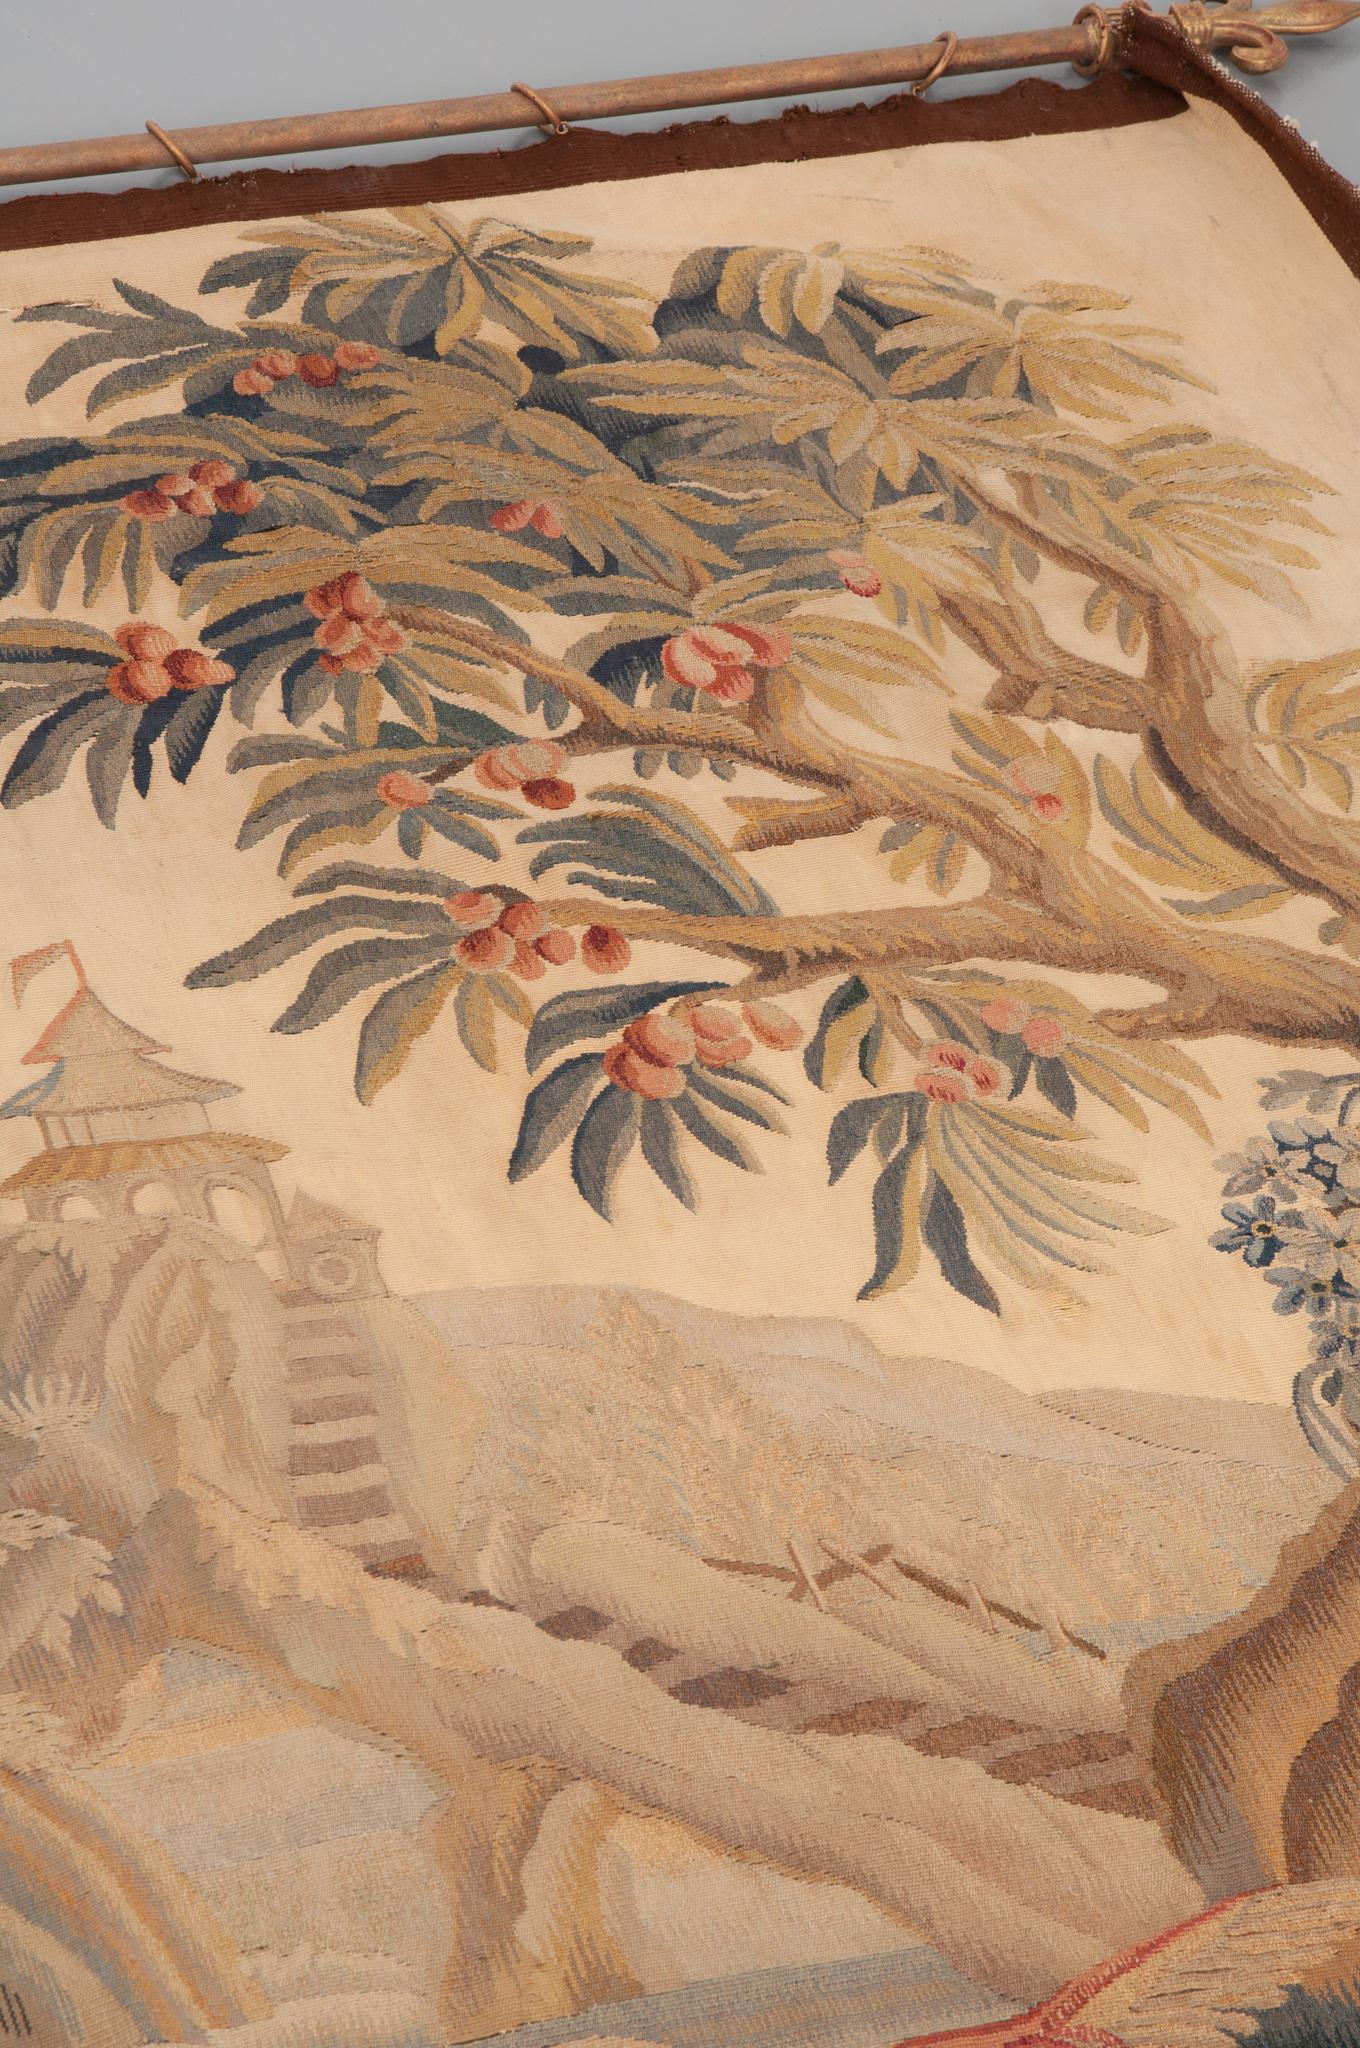 This 19th century French Tapisserie de Verdure, circa 1850s, is exquisite. It is wool and cotton, and hangs on a metal tapestry rod with rings. The scene is framed by beautiful trees and depicts most prominently a pagoda and exotic birds in the